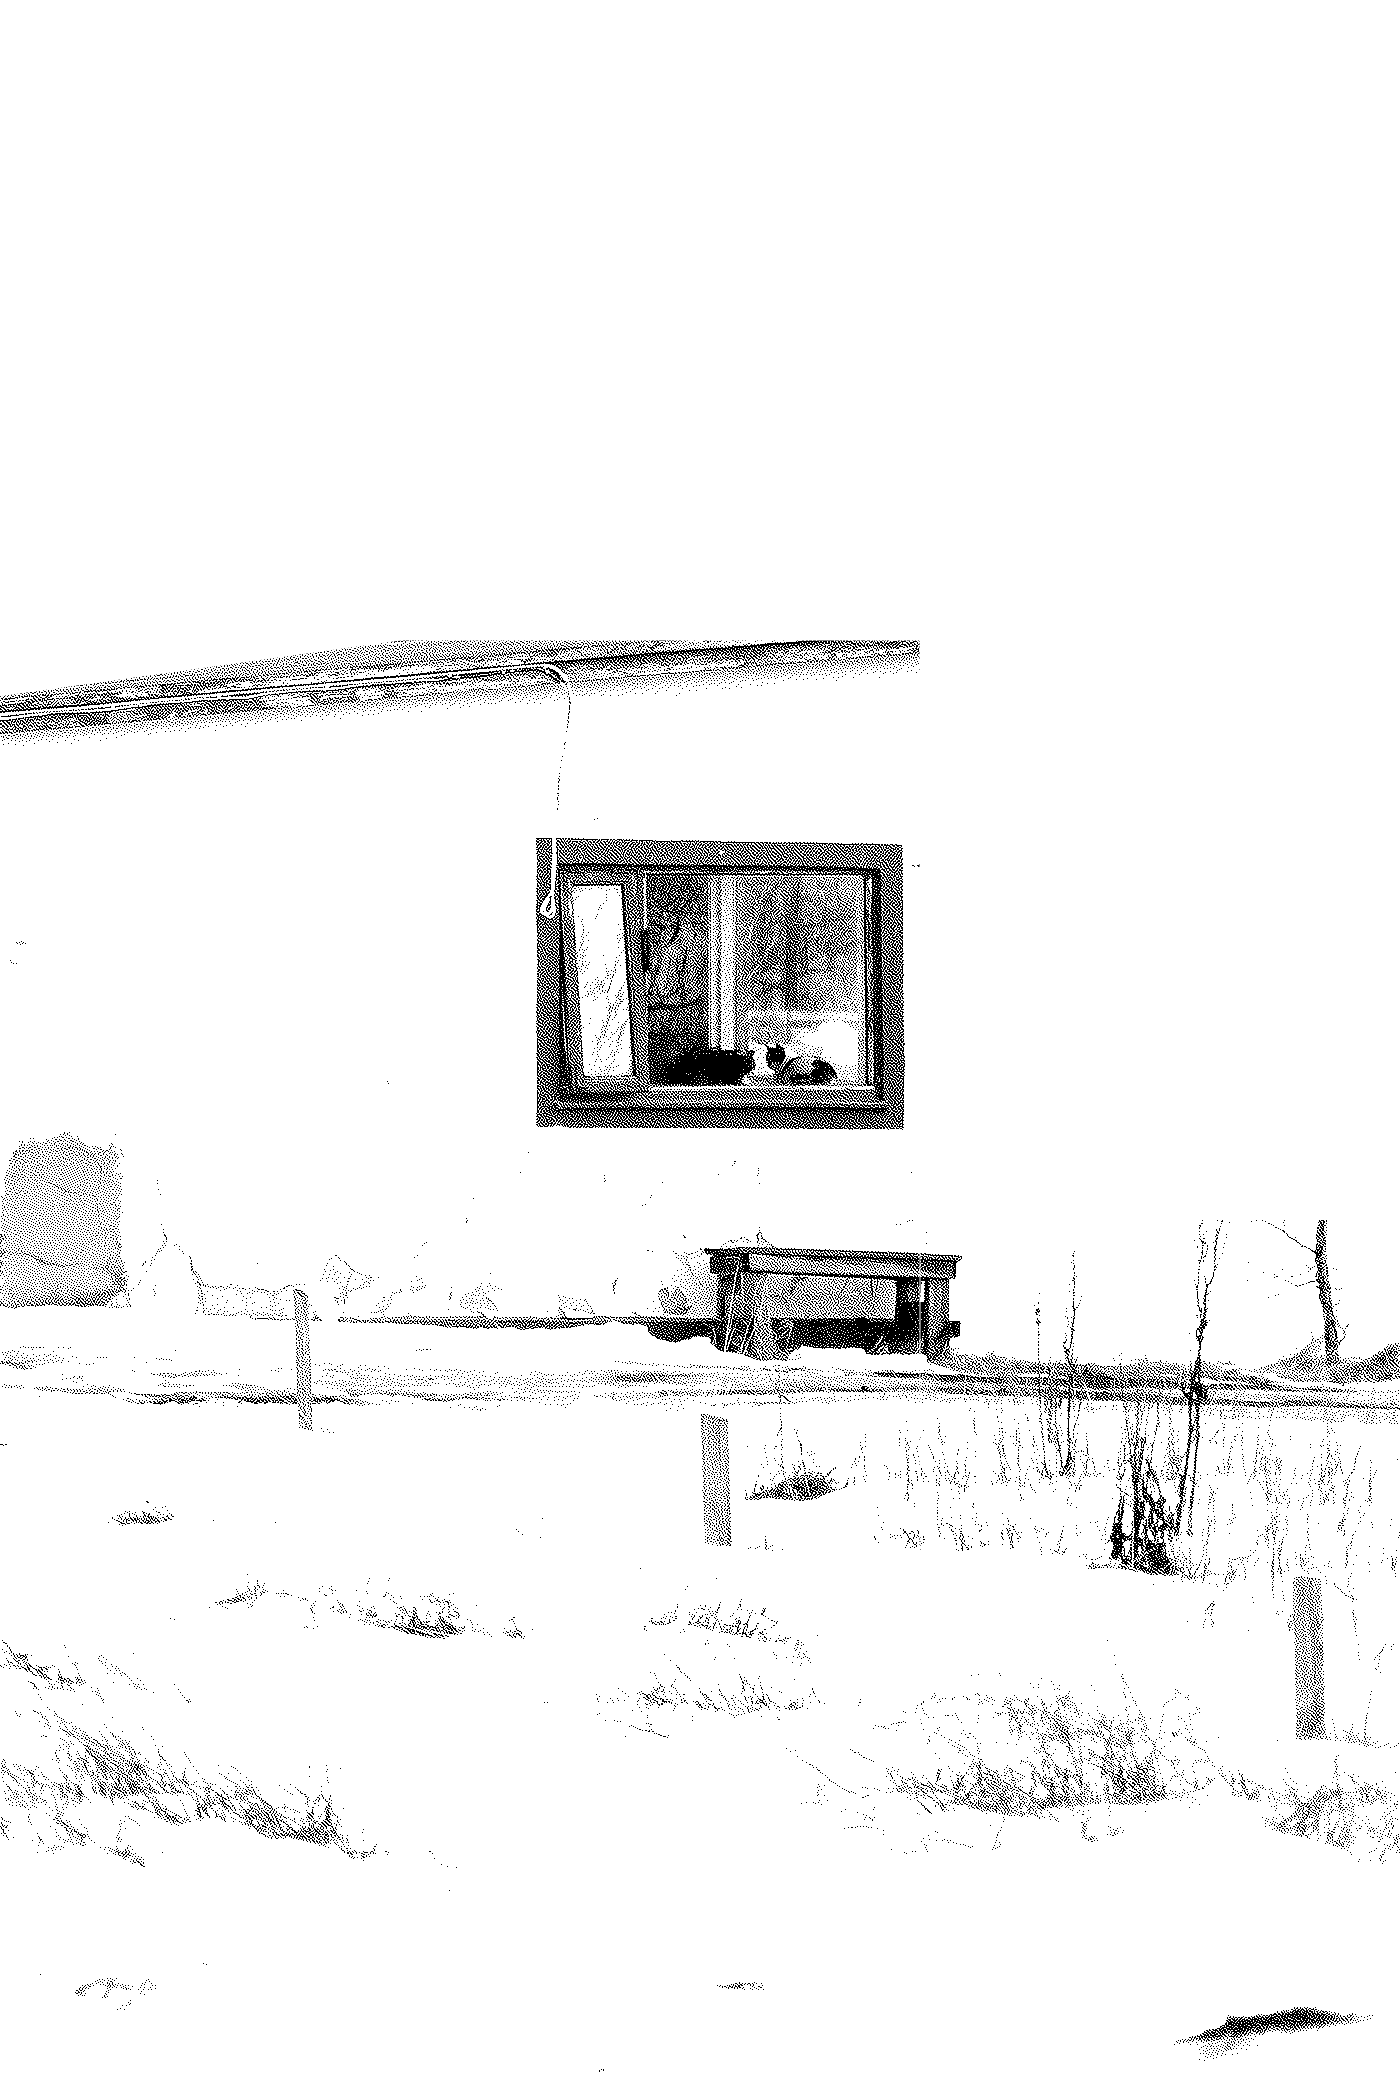 A high key, heavily dithered image of a small house covered with corrugated iron. In the window there are two cats loafing.